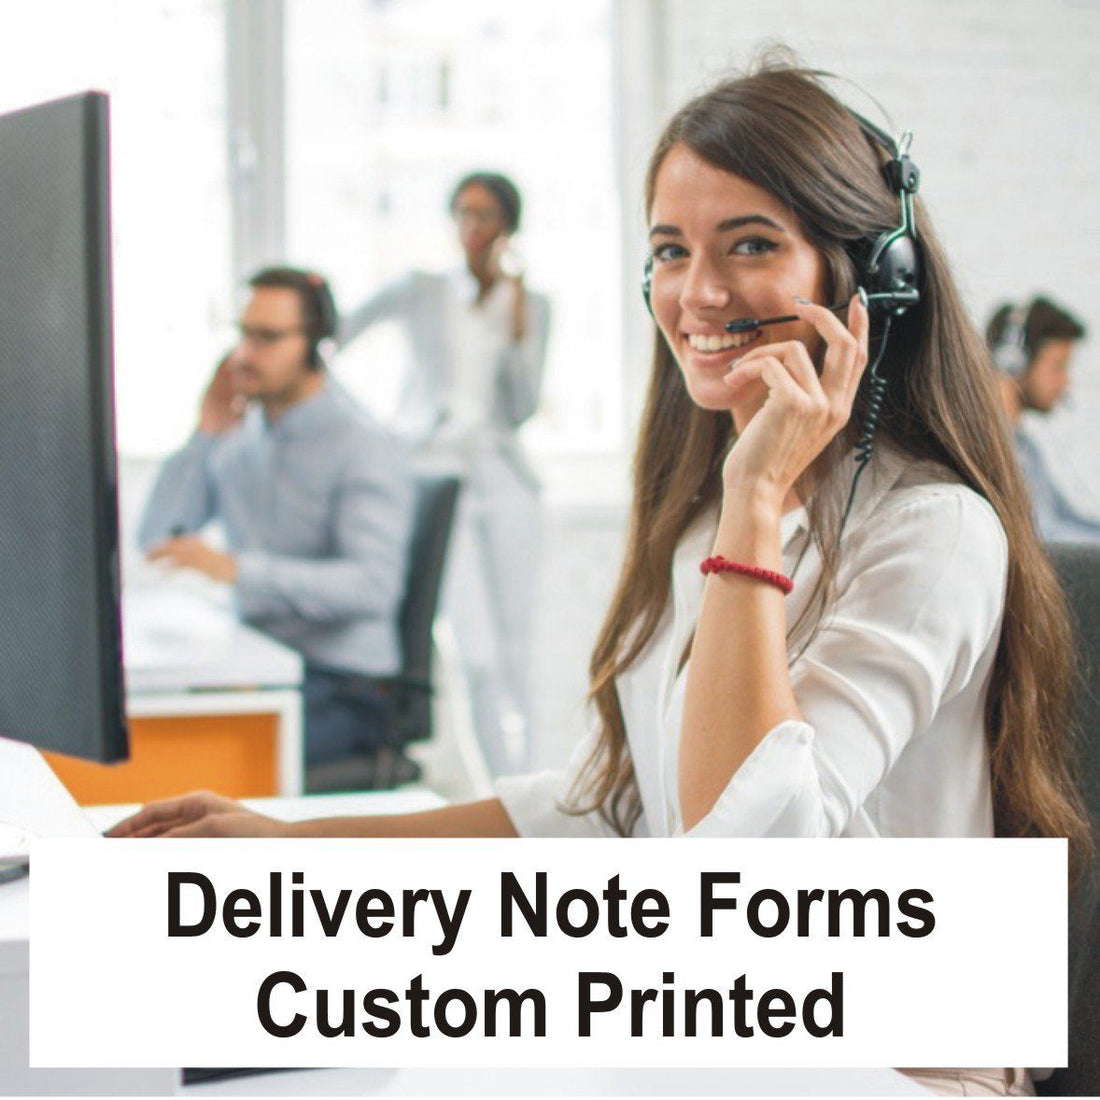 Do you Need Delivery Note Forms?